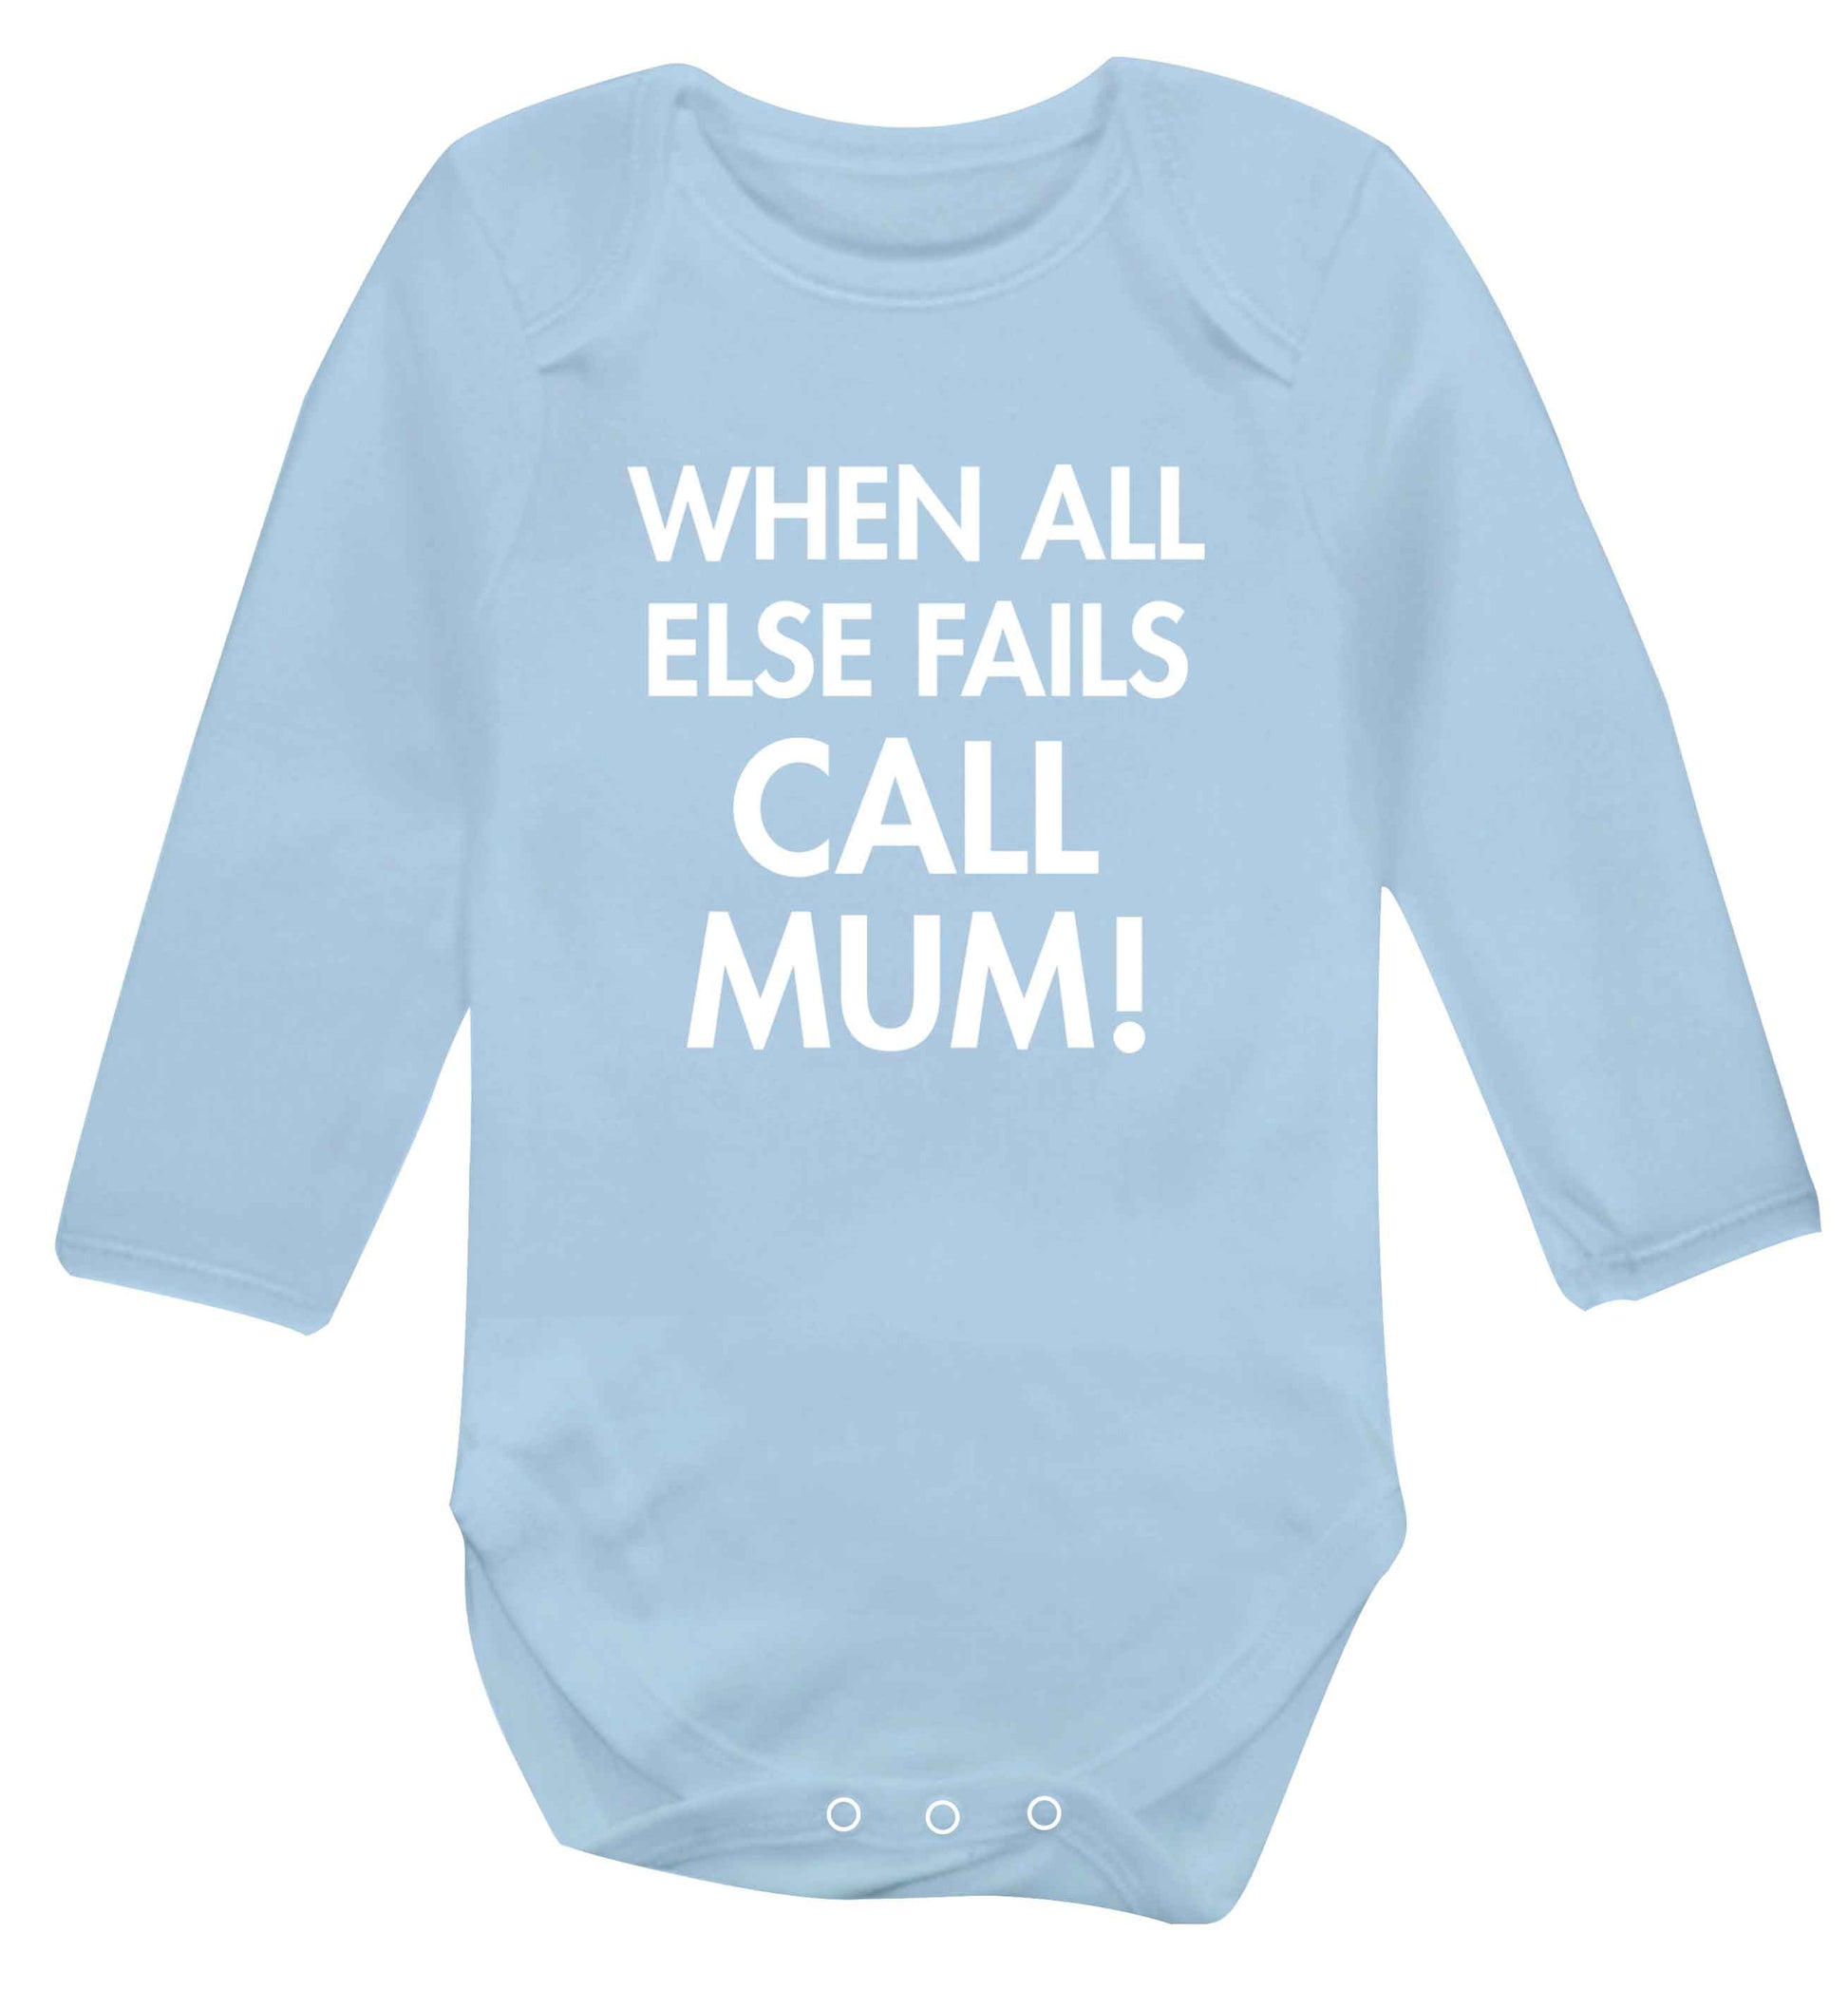 When all else fails call mum! baby vest long sleeved pale blue 6-12 months